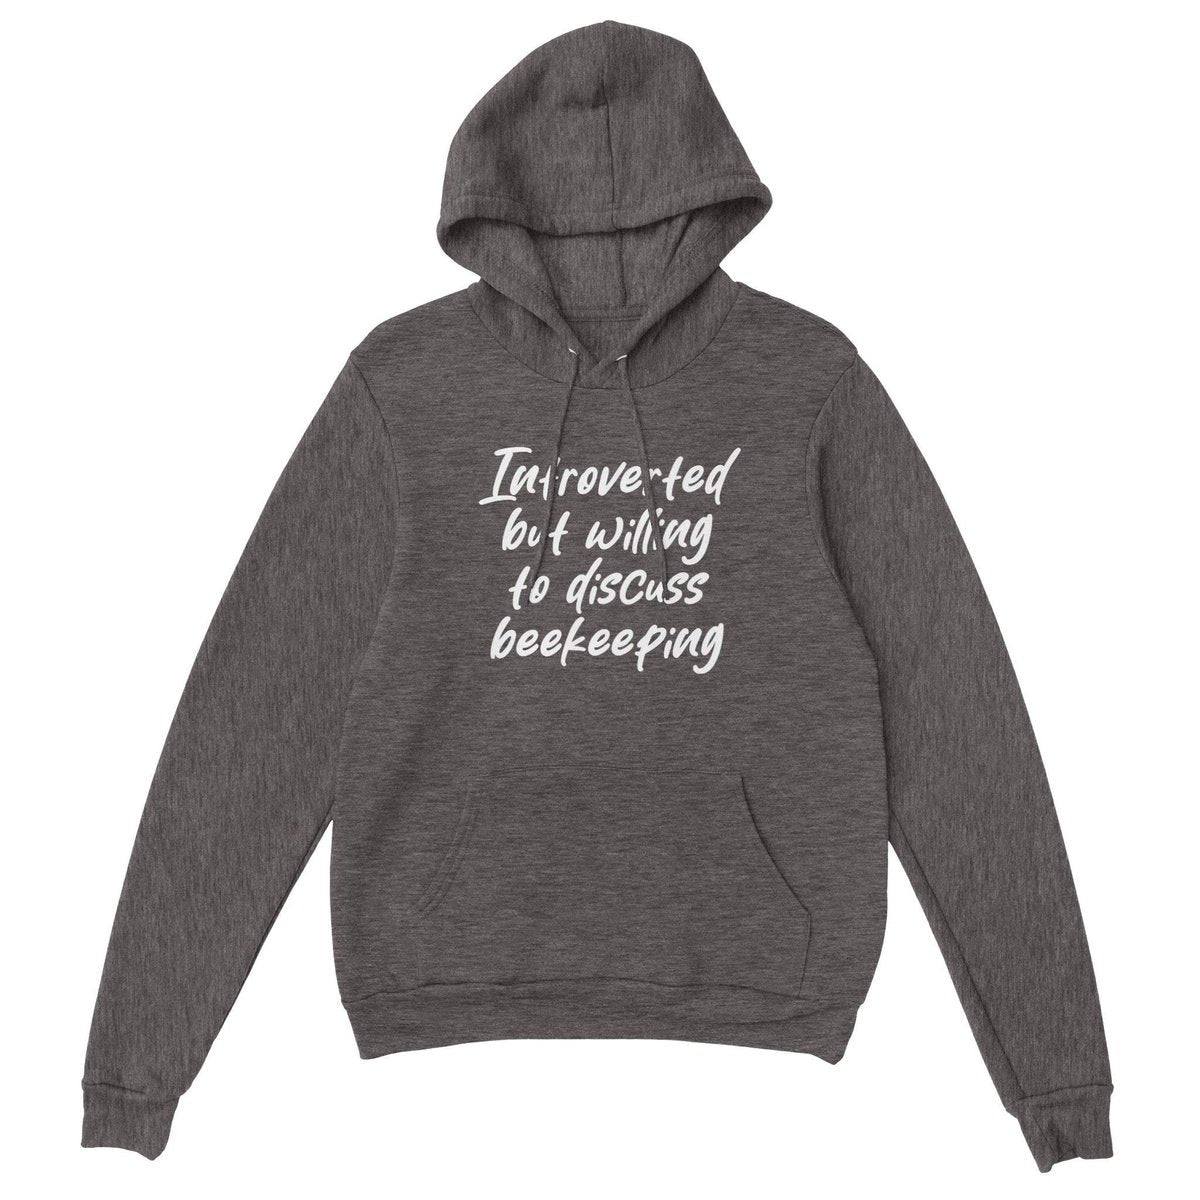 Introverted but willing to discuss beekeeping Hoodie - Premium Unisex Pullover Hoodie Australia Online Color